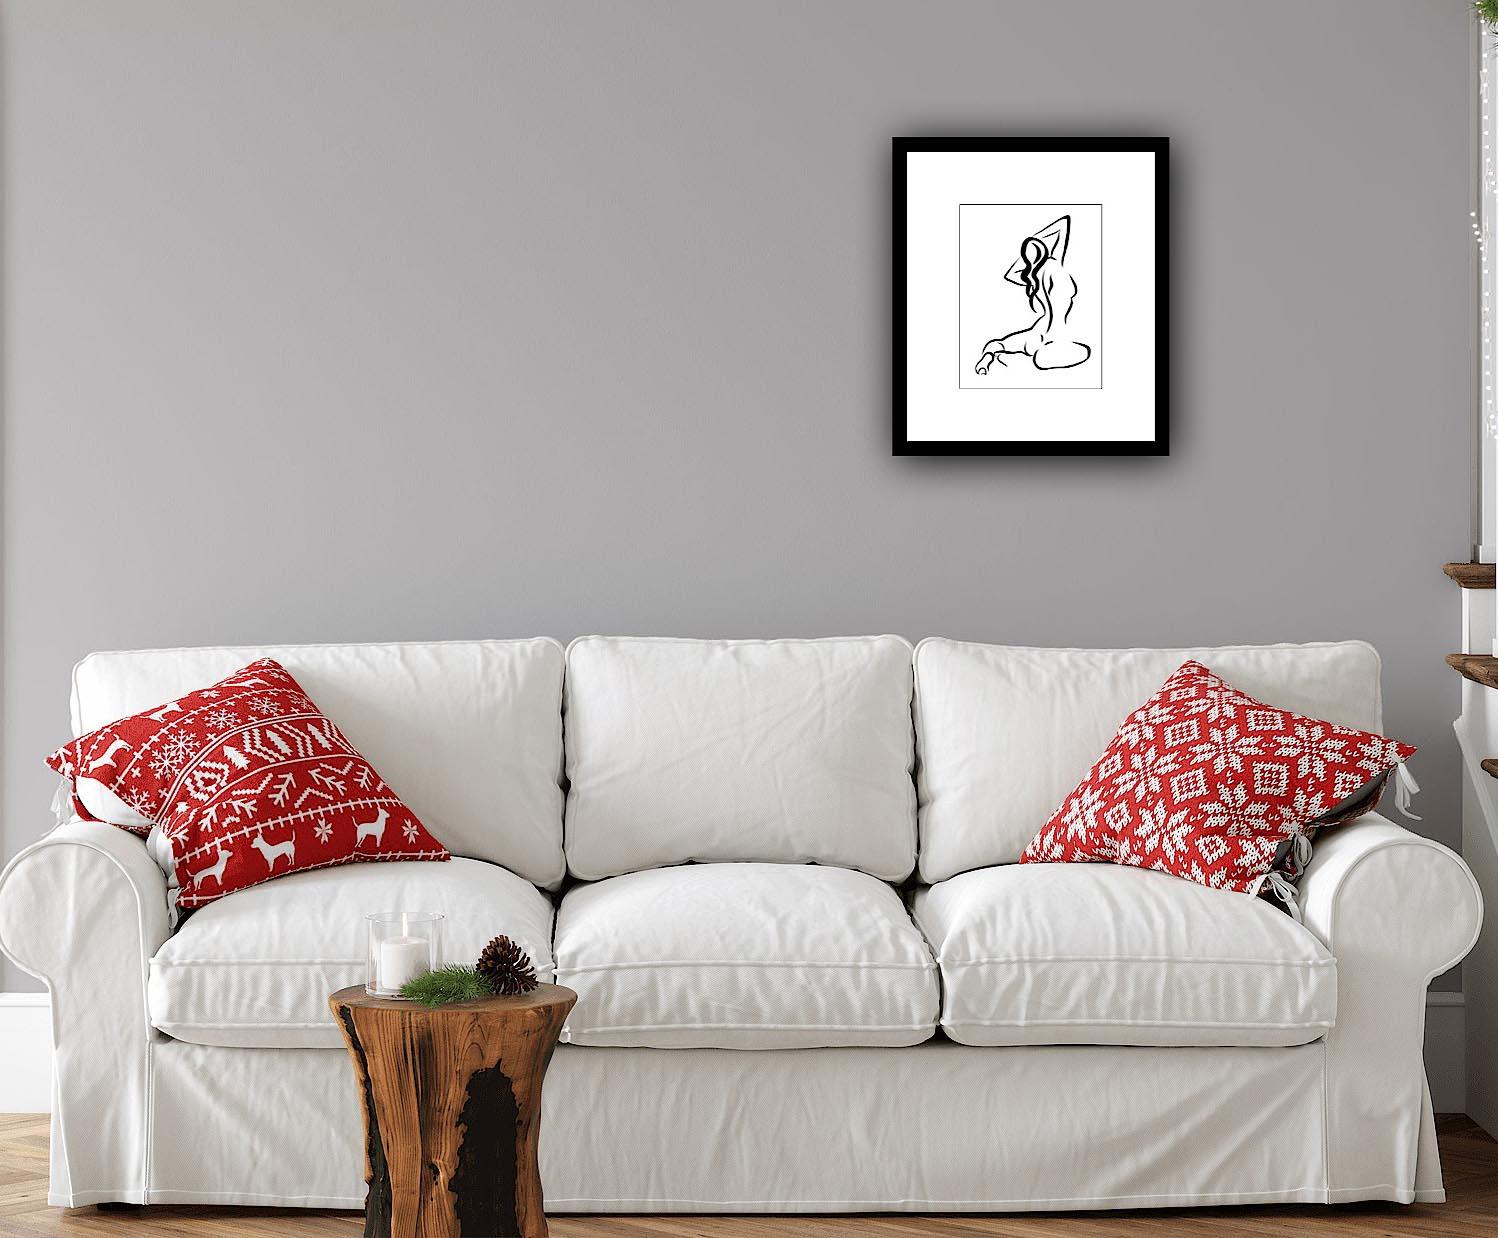 Haiku #17, 1/50 - Digital Vector Drawing of Seated Female Nude from Behind For Sale 11